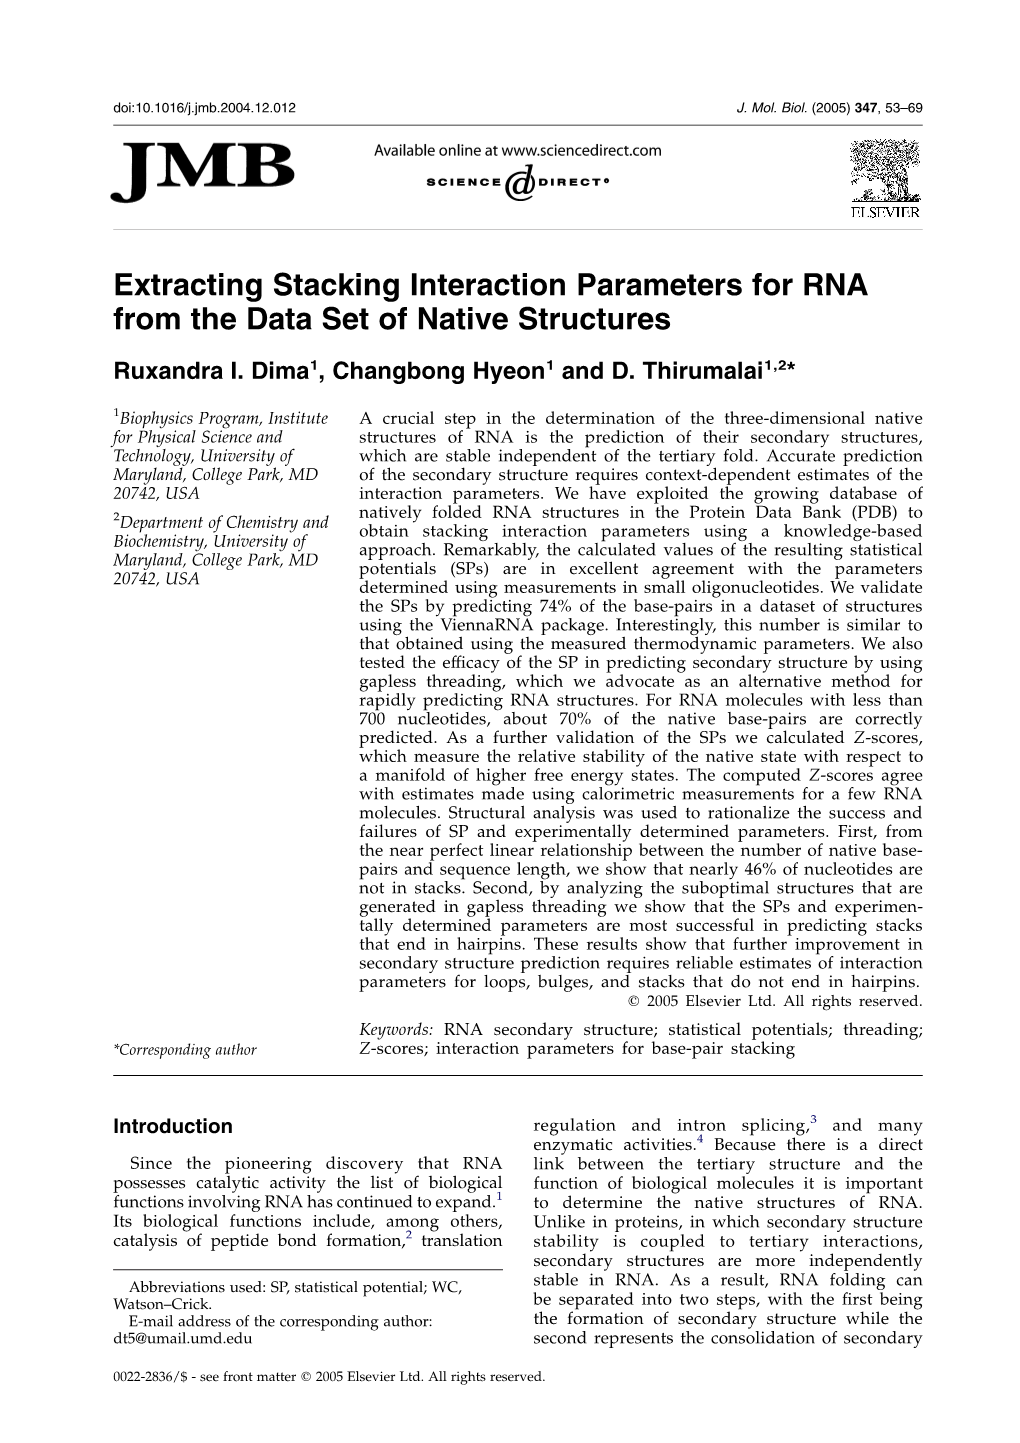 Extracting Stacking Interaction Parameters for RNA from the Data Set of Native Structures